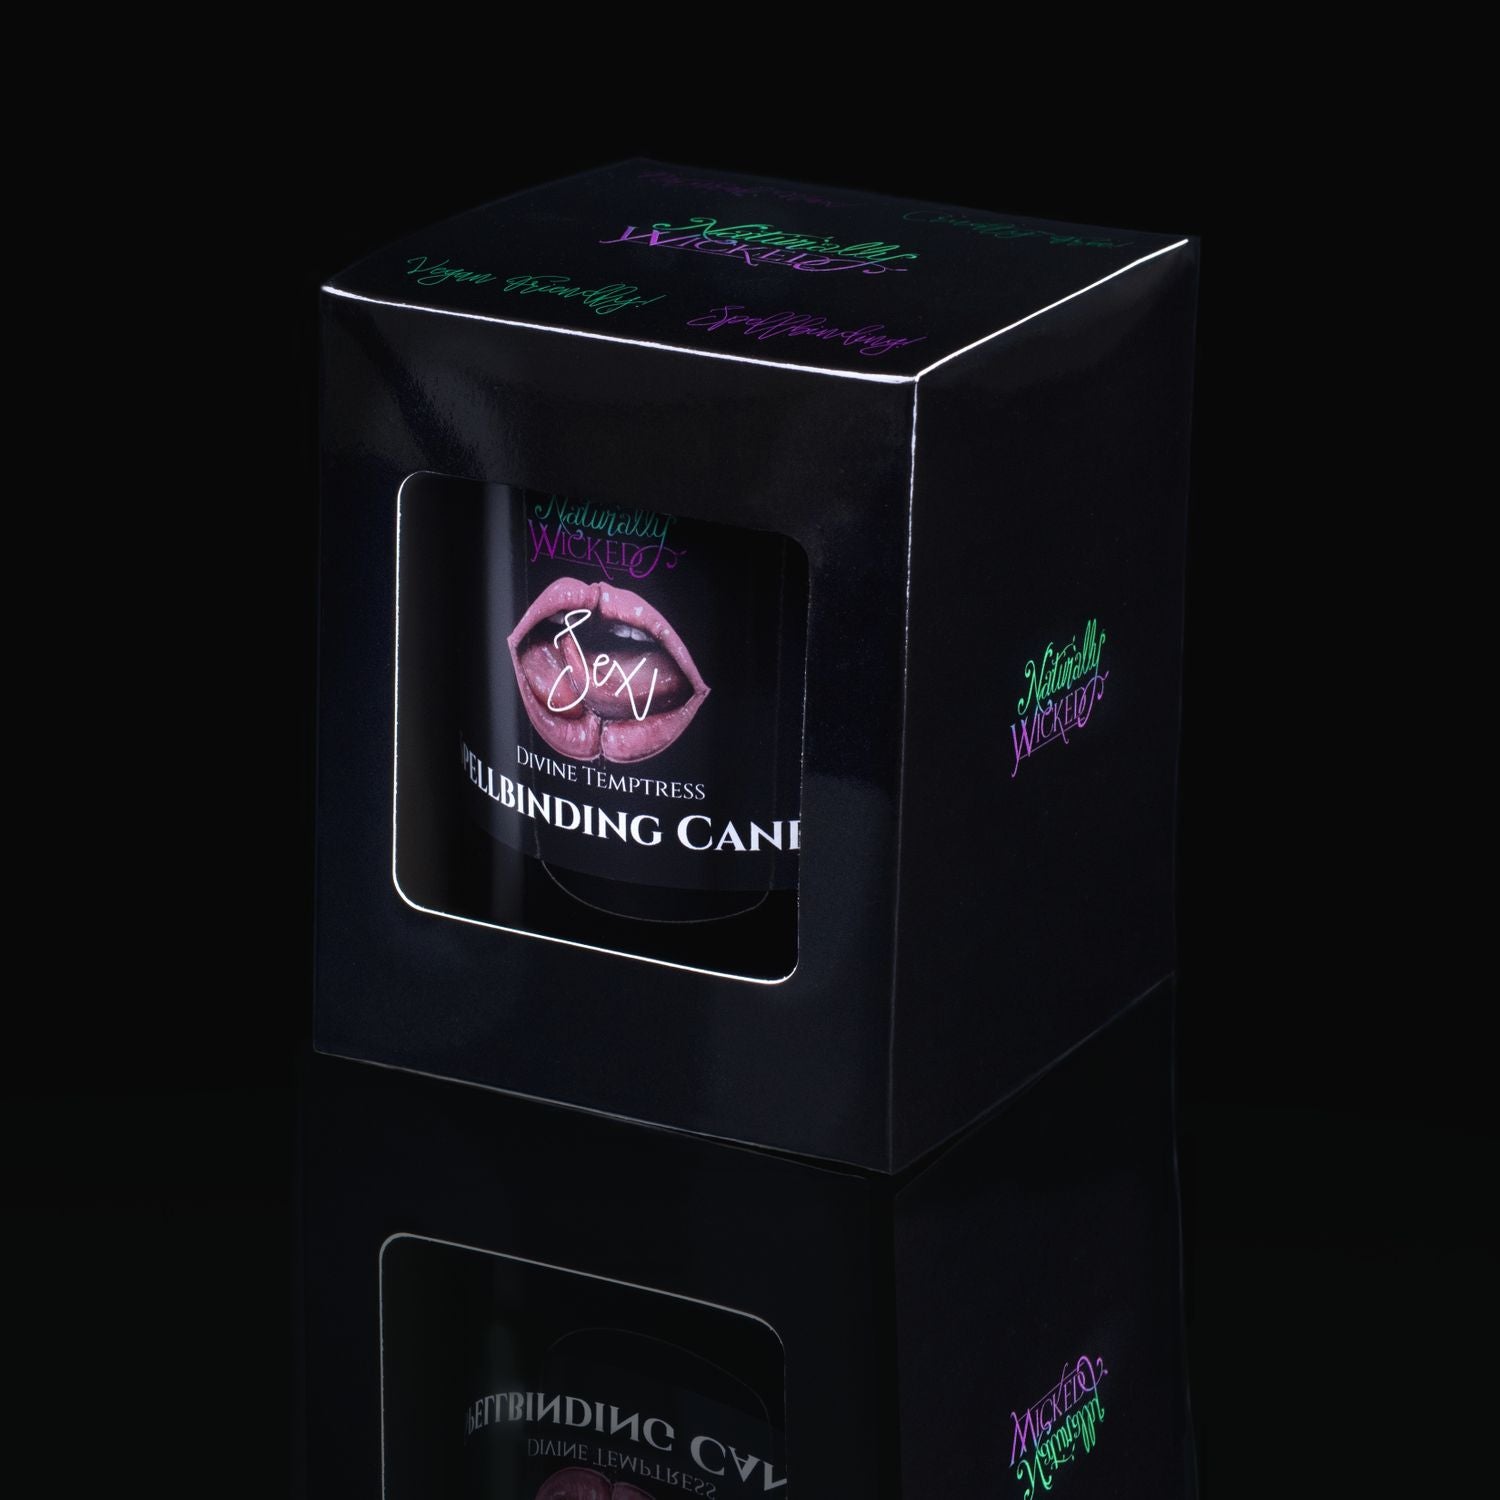 The Perfect Spell Candle To Release Sexual Desires. Naturally Wicked Spellbinding Sex Candle Displayed In A Sleek Black Gloss Gift Box. The Candle Features Plant-Based Smooth Pink Wax, A Wood Wick And A Beautiful Rhodonite Crystal.